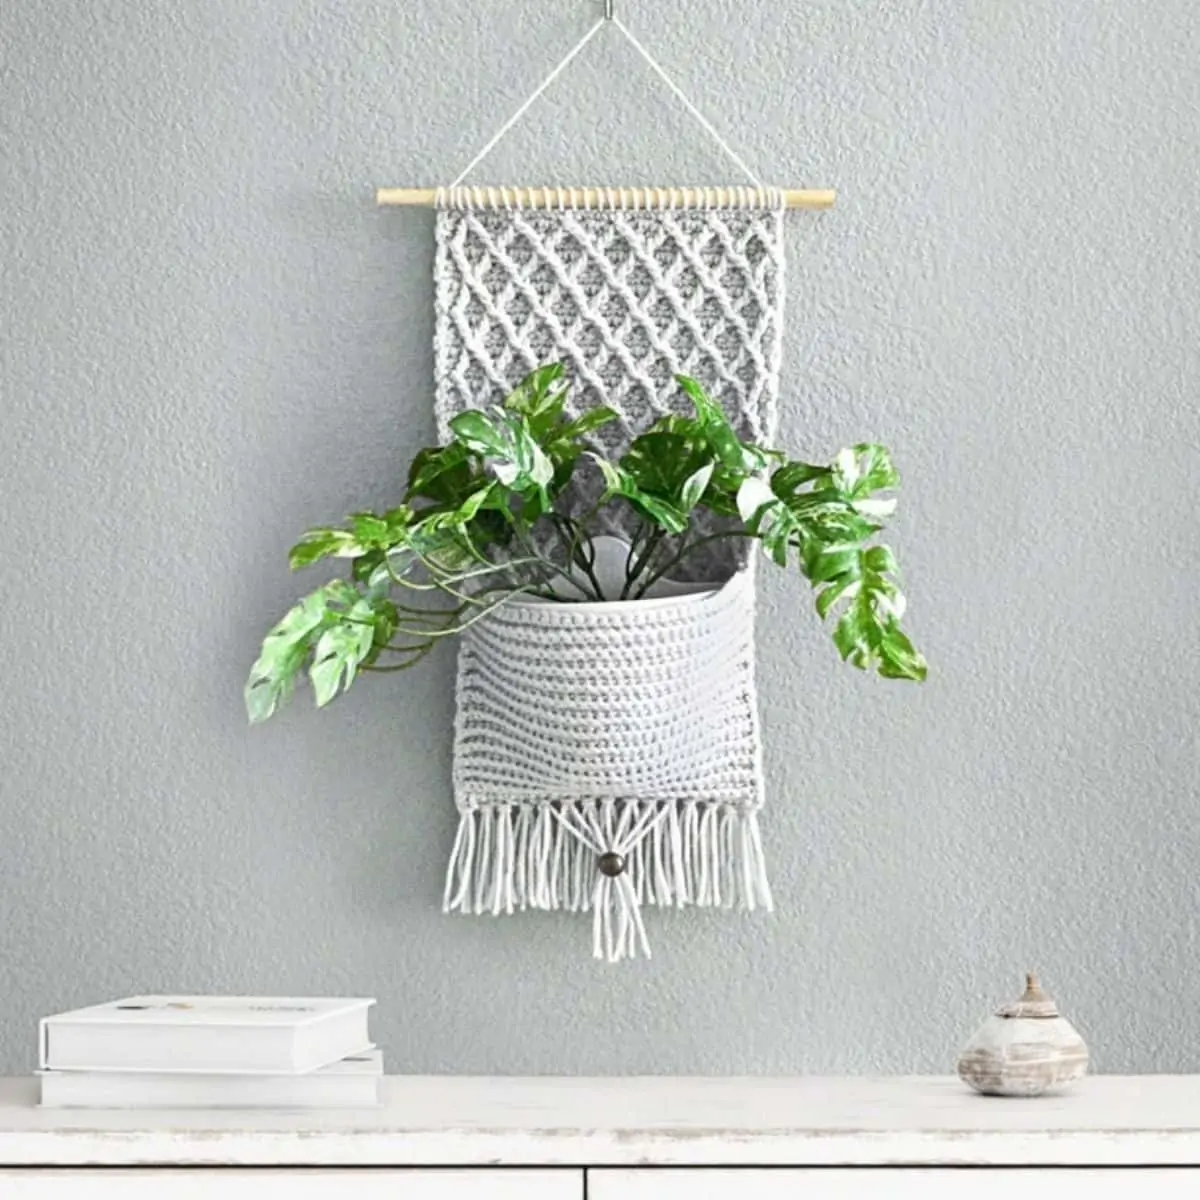 crochet plant hanger with a lovely plant flowing out of the pocket.